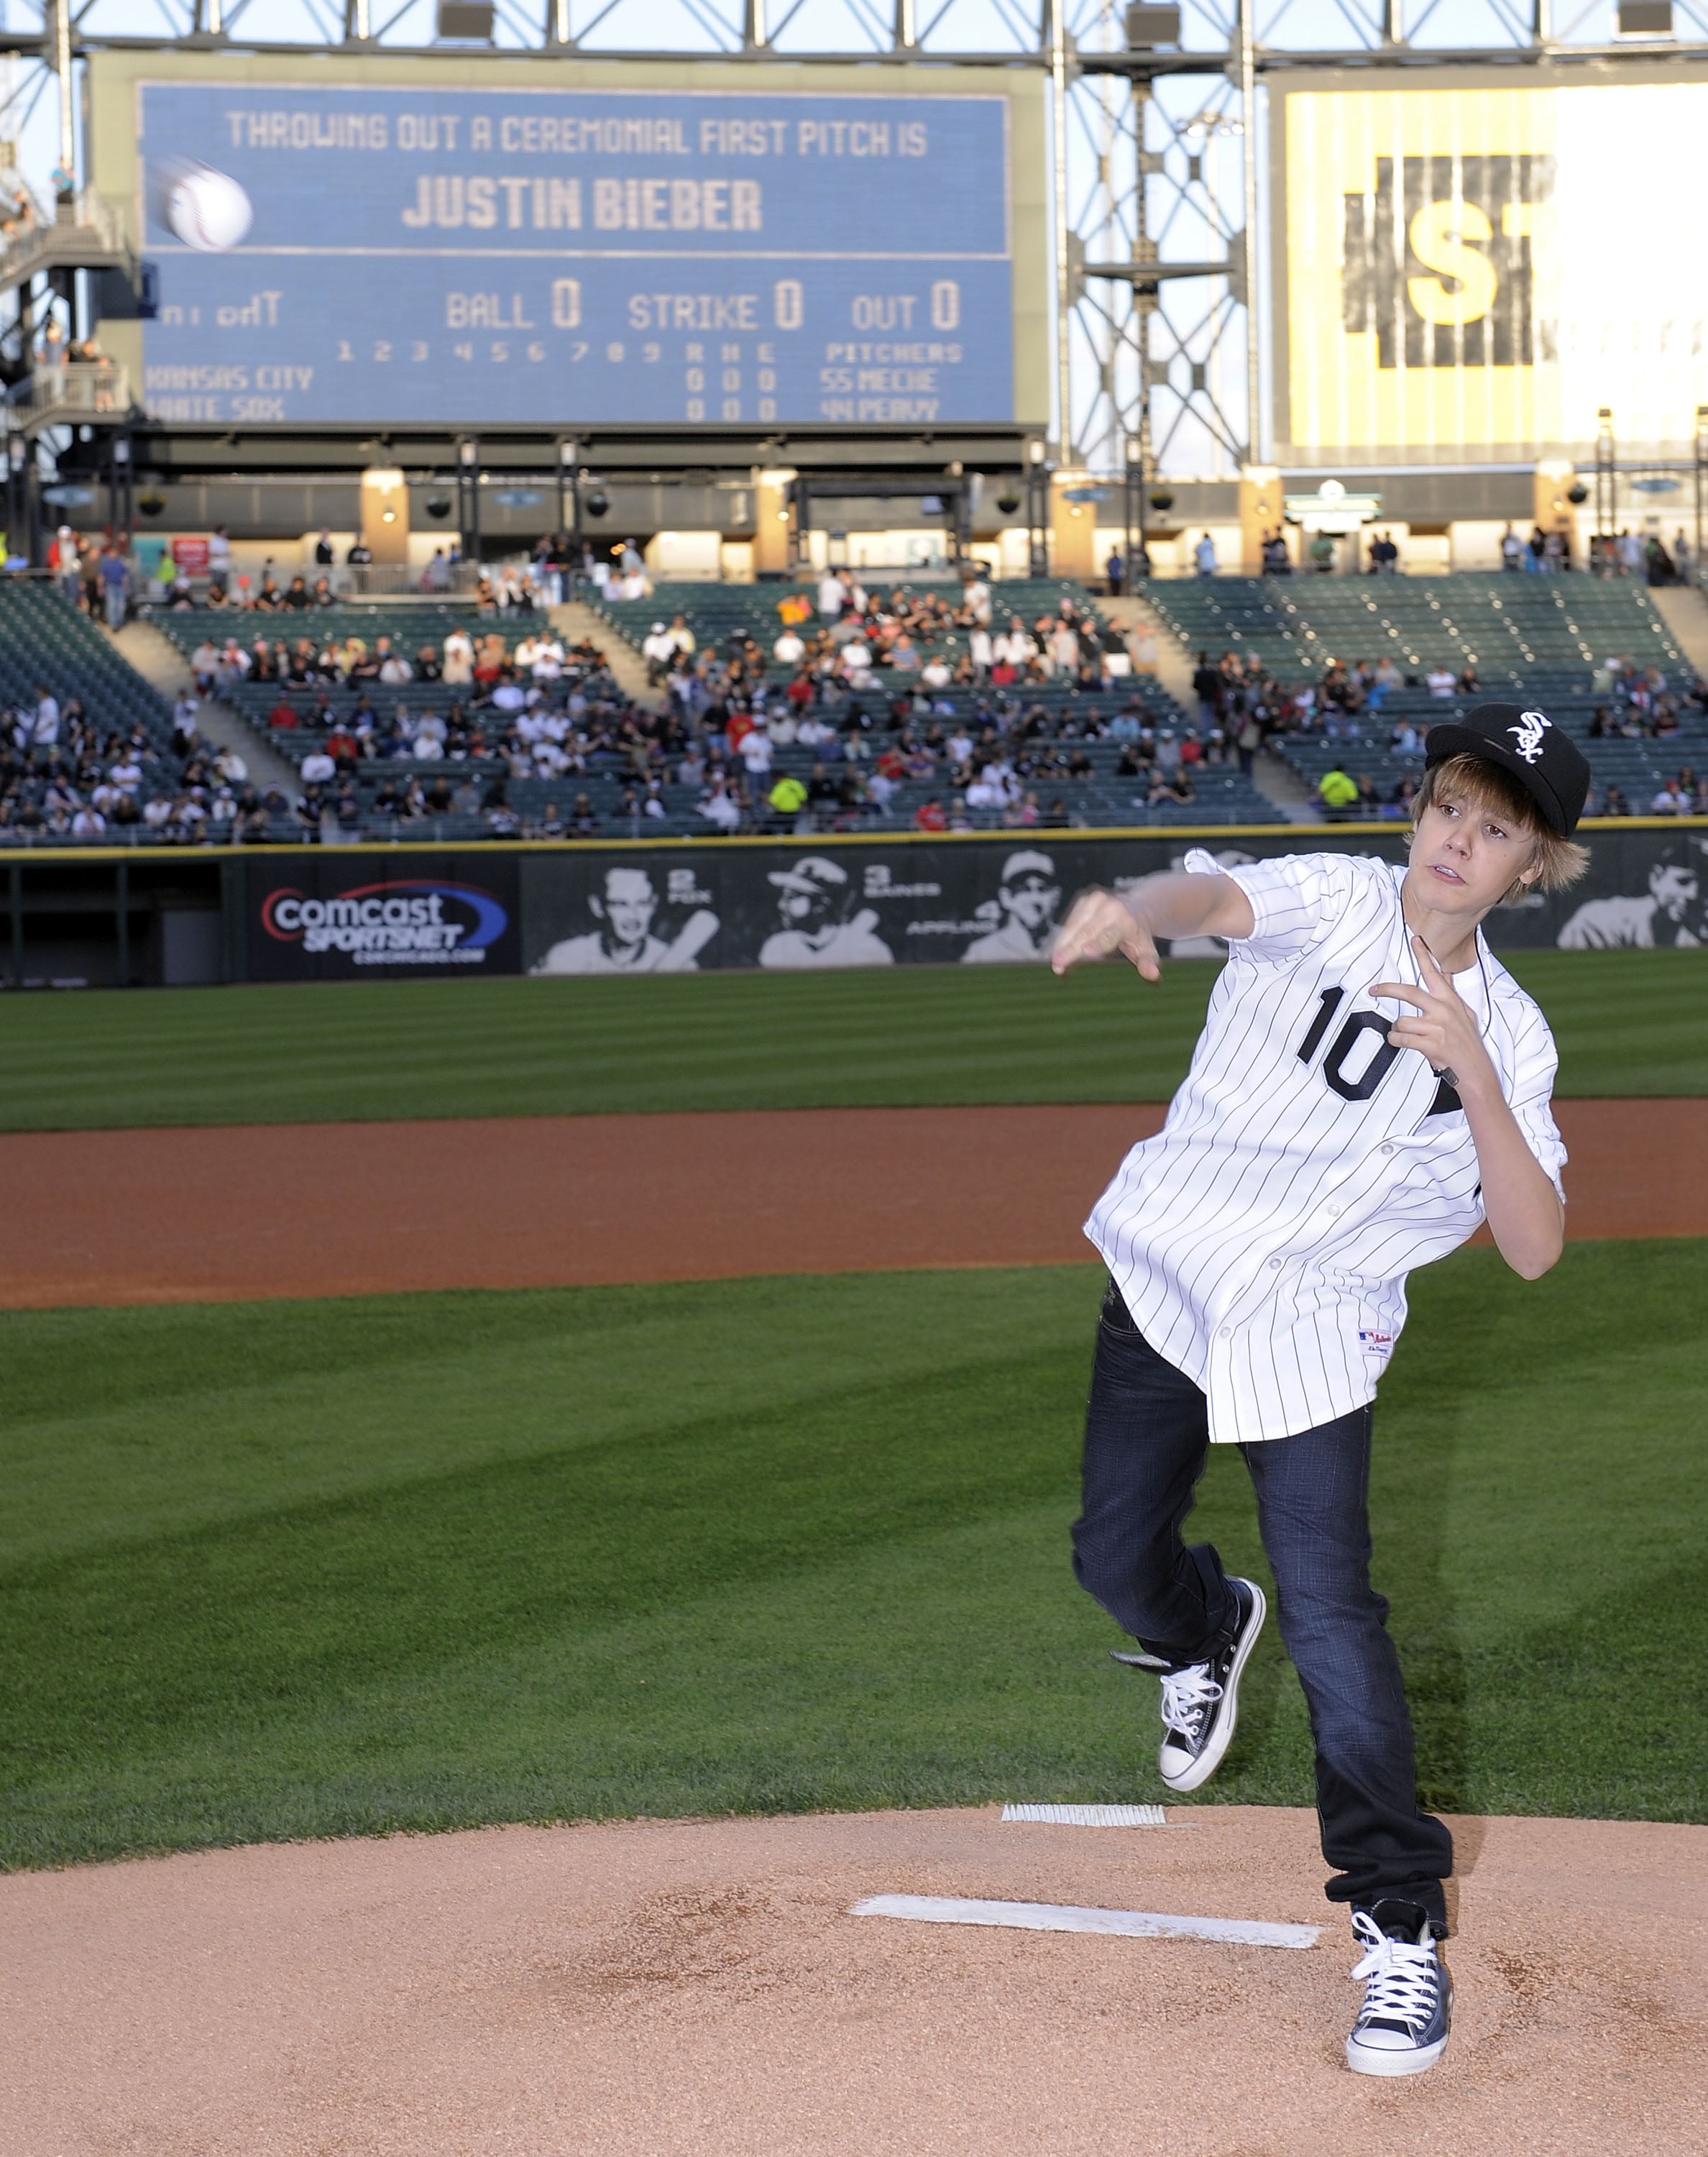 Jerry Seinfeld throws out the first pitch before a game between the